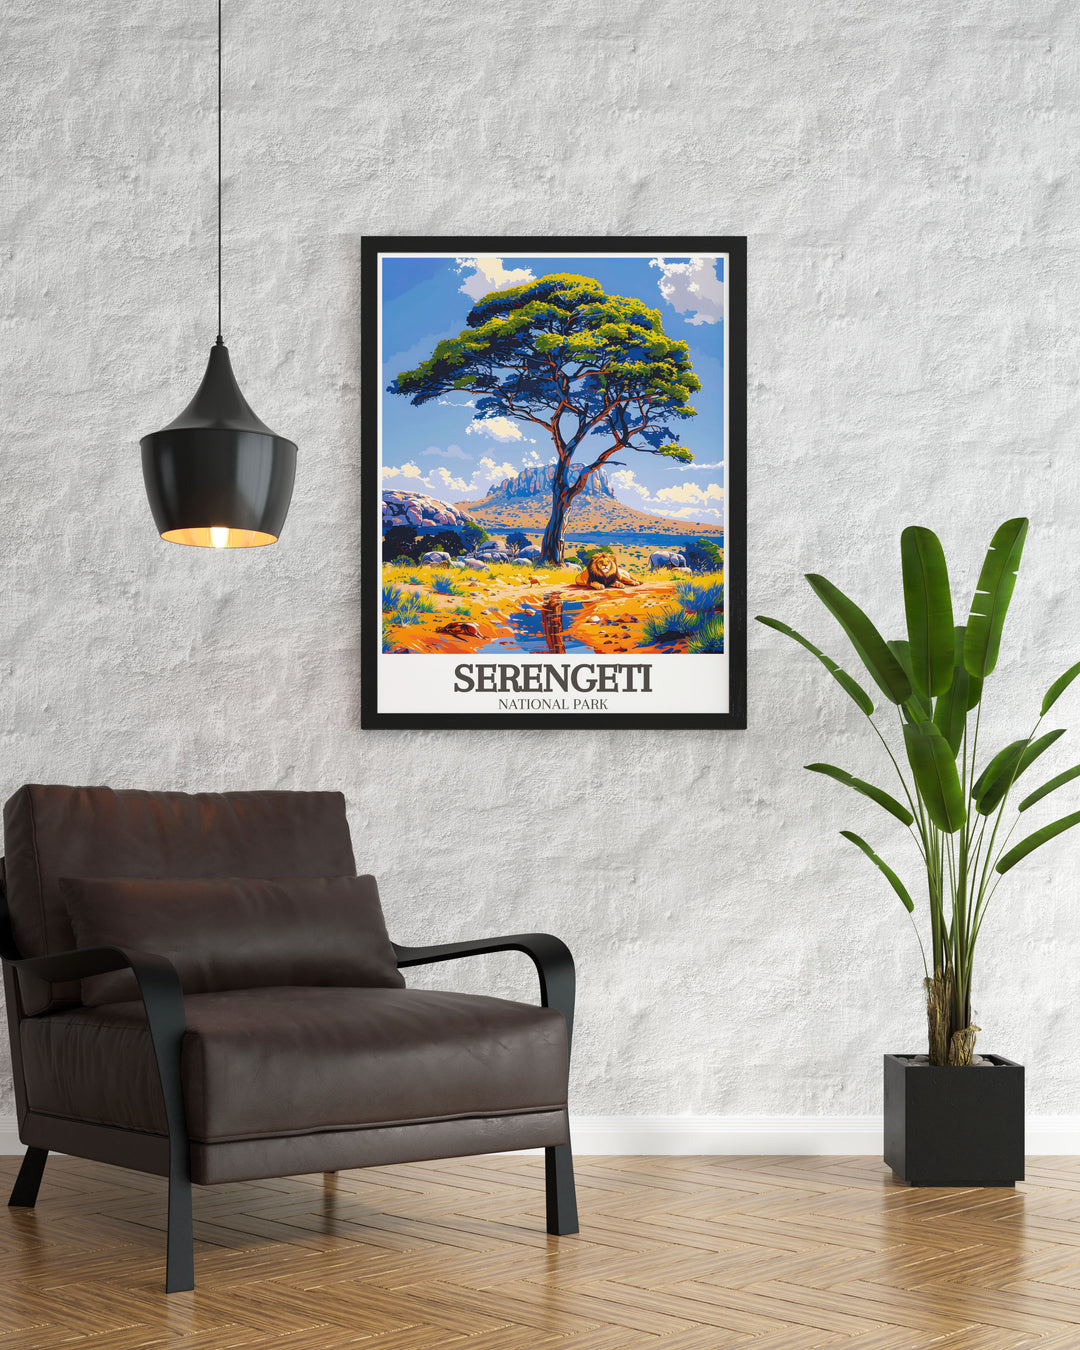 Stunning Tanzania poster with Acacia tree Wildlife savanna backdrop ideal for adding a touch of African elegance to your home decor